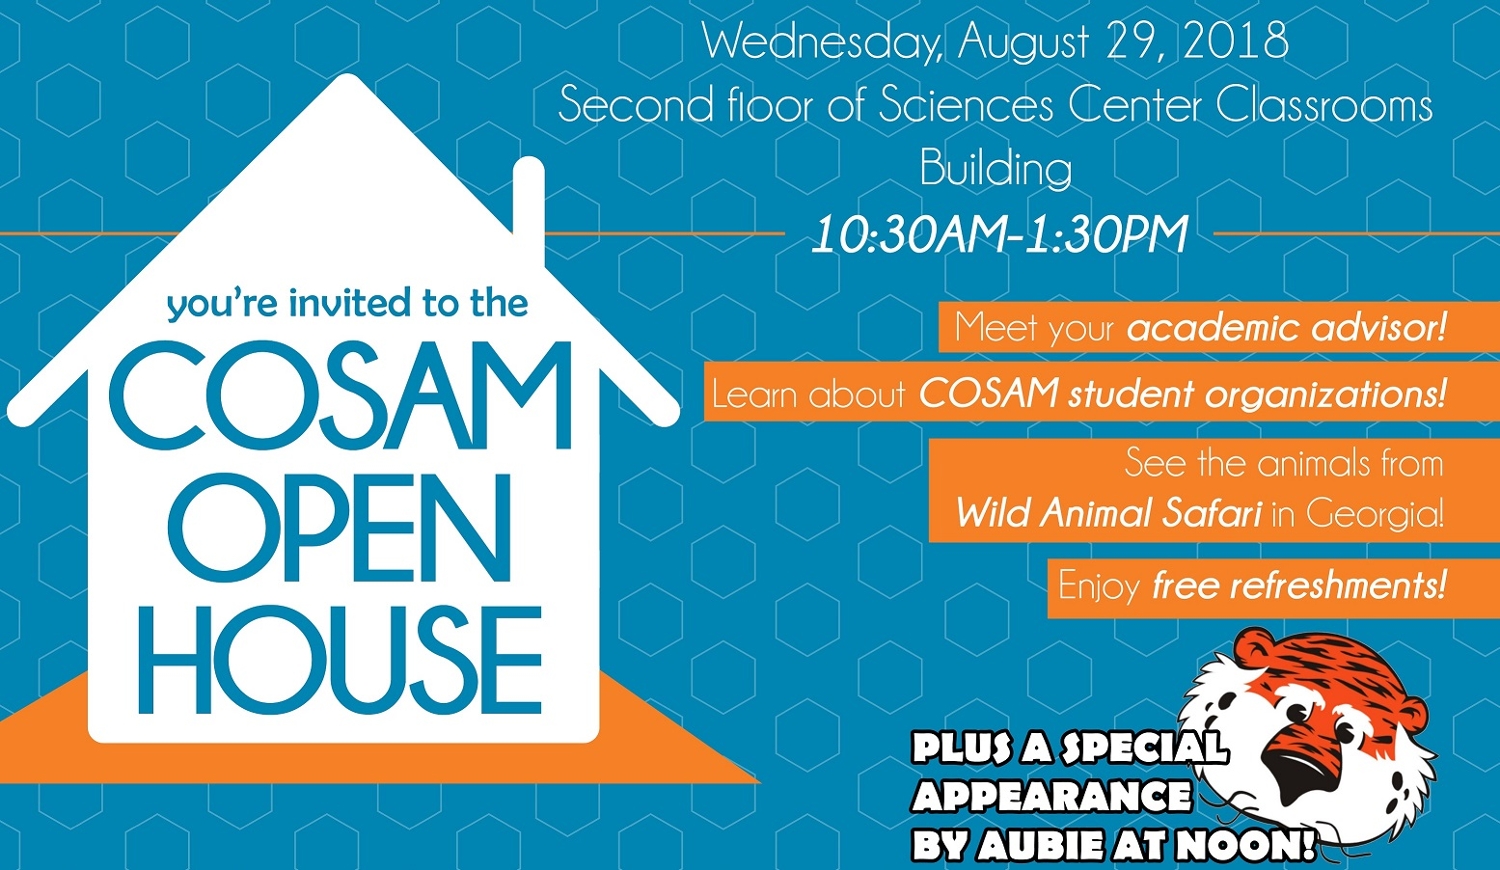 Don't miss the COSAM Open House on August 29!